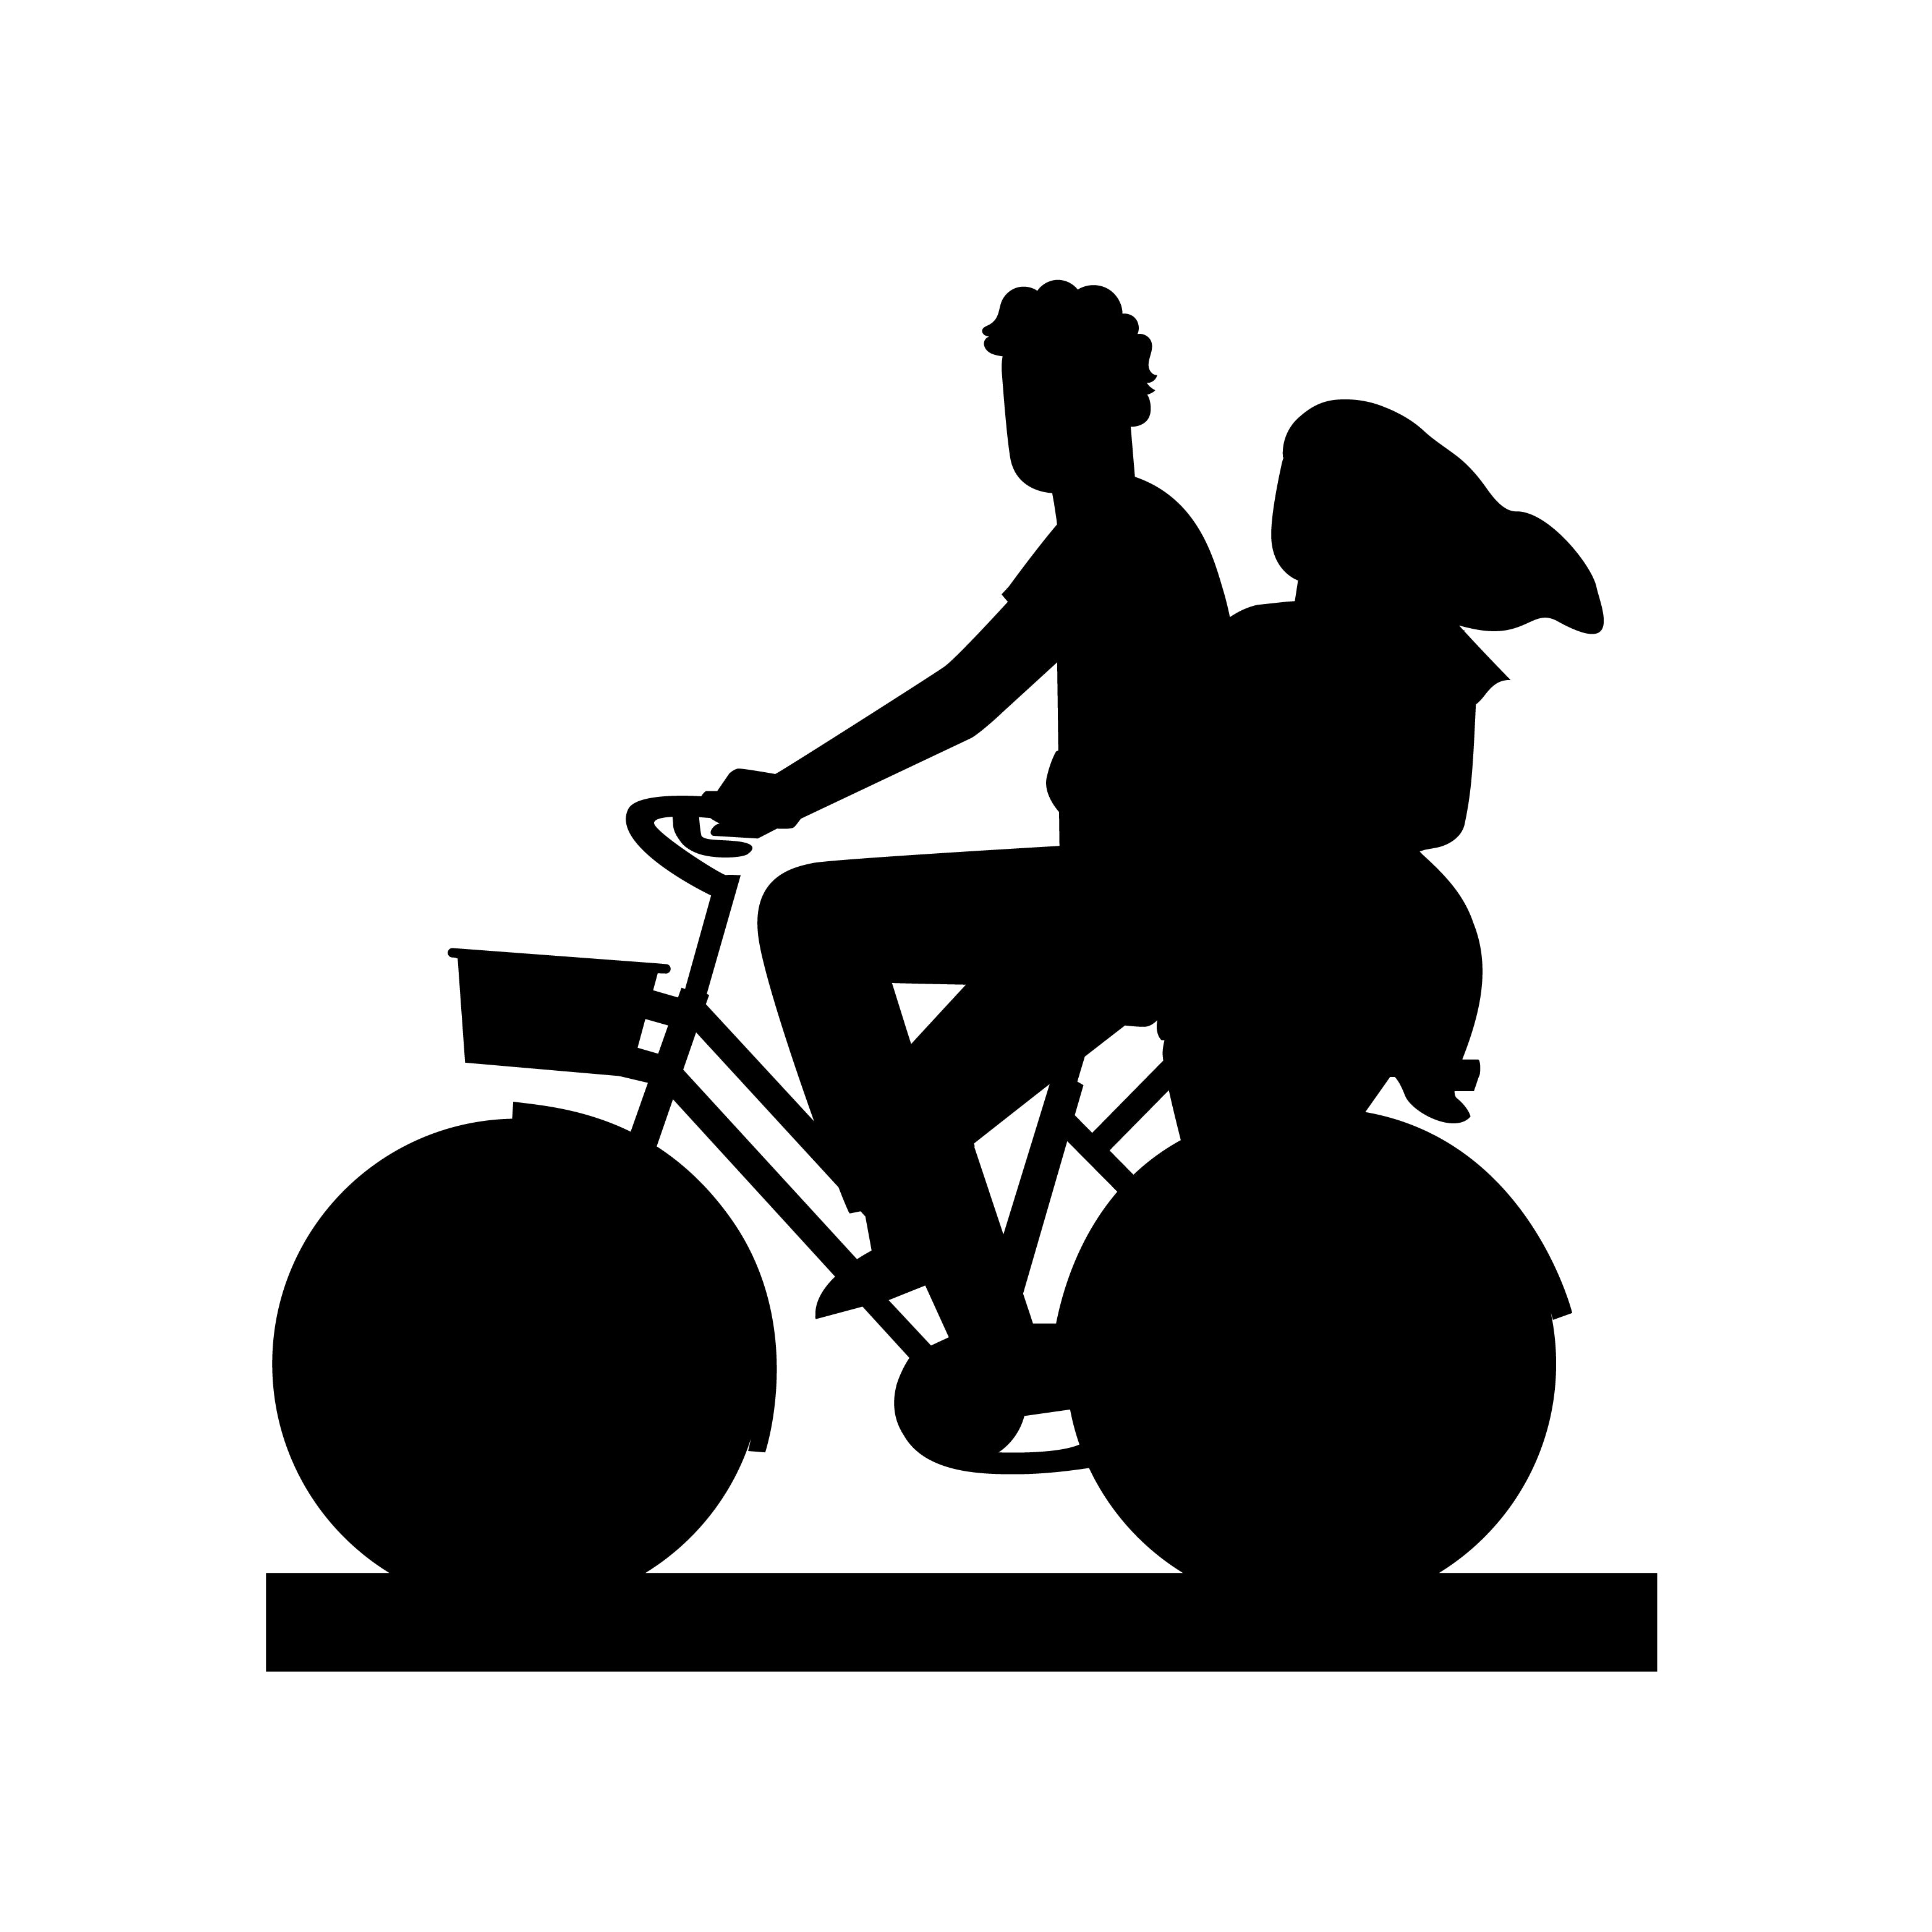 Couple On Cycle Black Engineered Wood Wall Art Cutout, Ready To Hang Home Decor 2